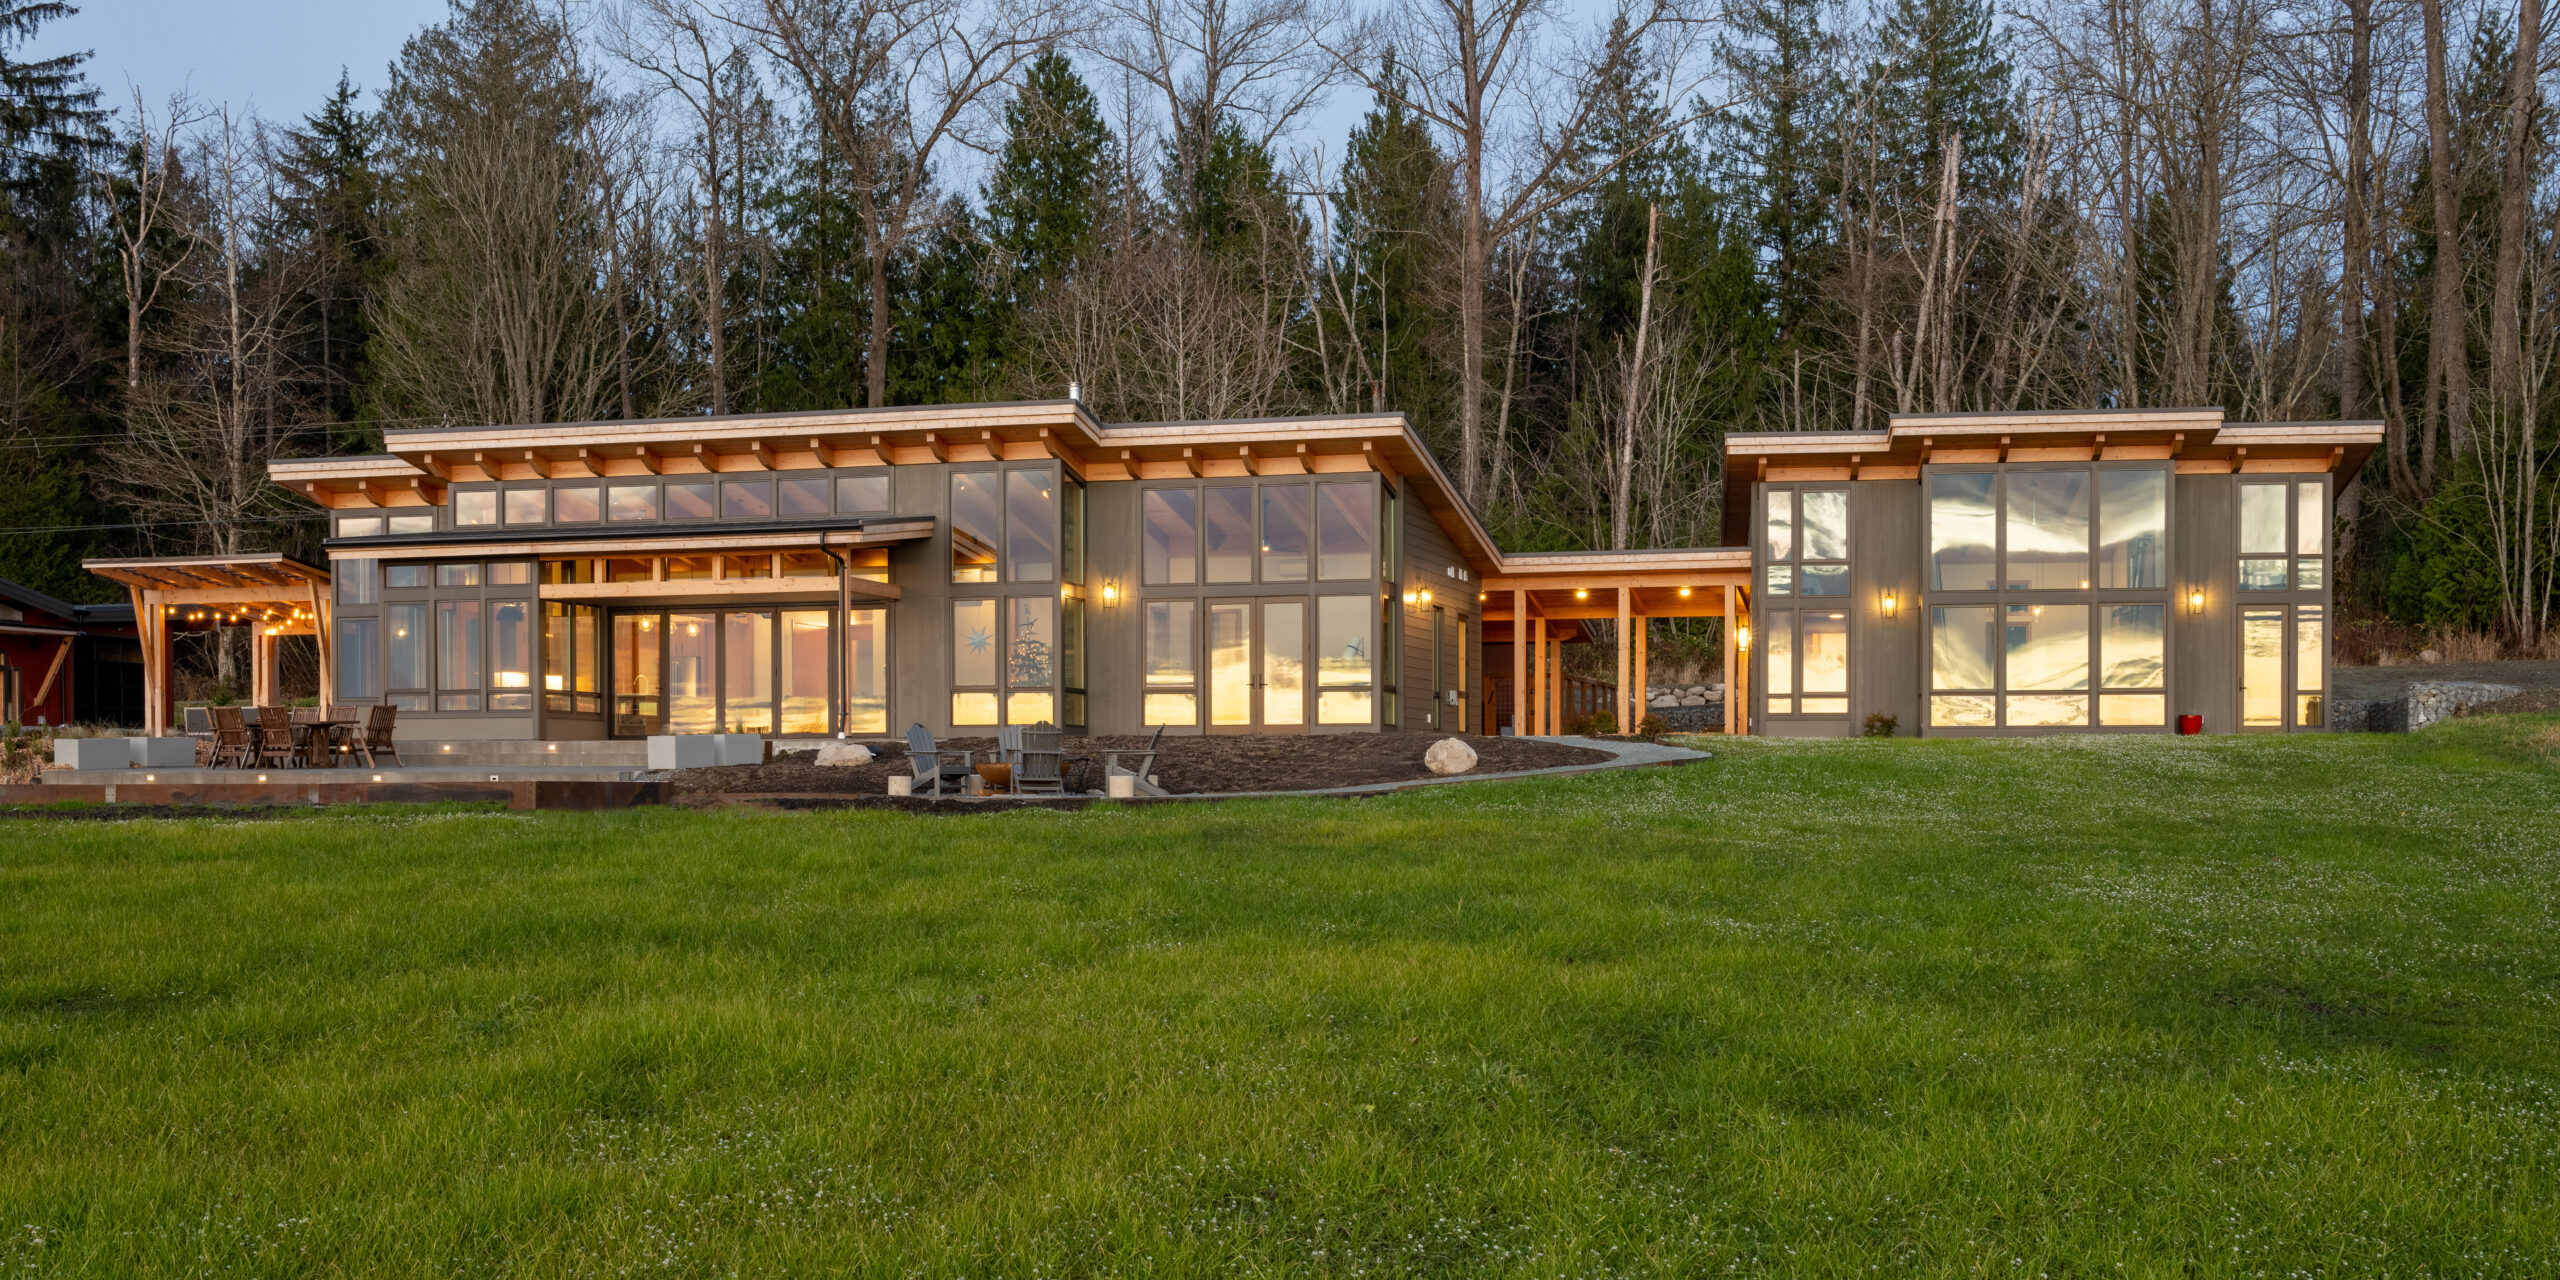 This house located in Bow, Washington, was built using structural insulated panels. It is 1,836 square feet with an additional 839-square-foot accessory dwelling unit. LUCAS HENNING